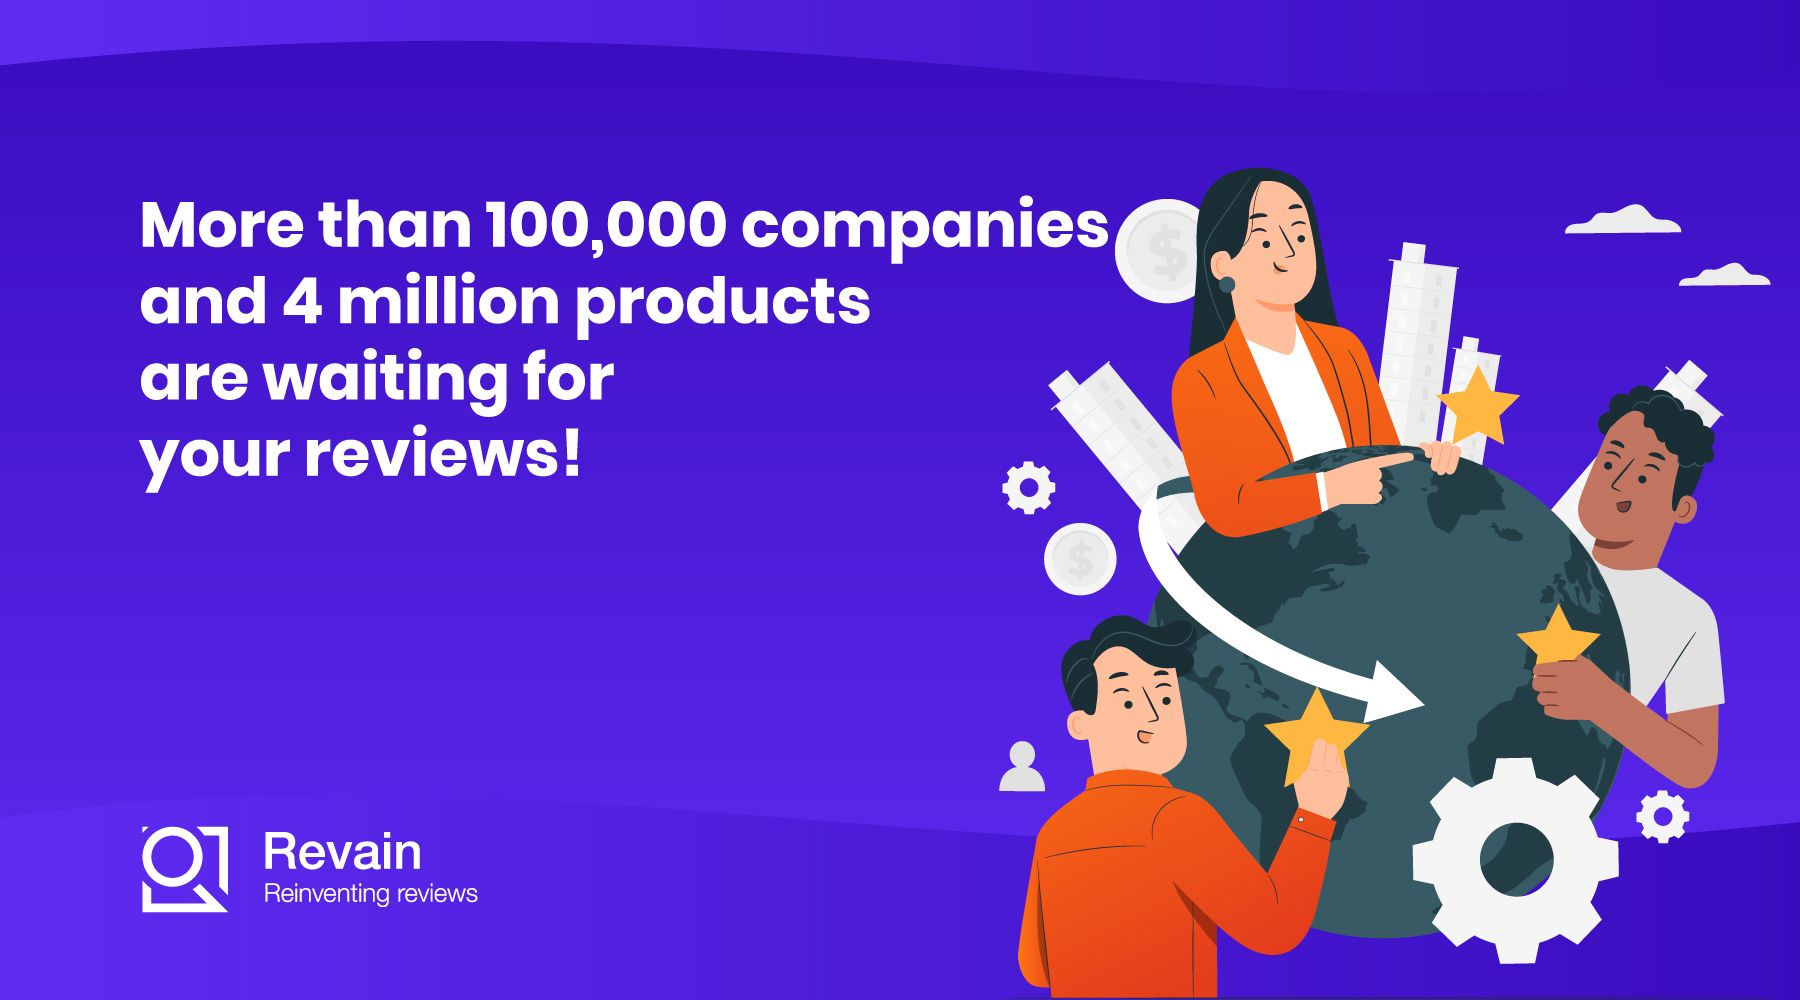 More than 100,000 companies and 4 million products are waiting for your reviews! 